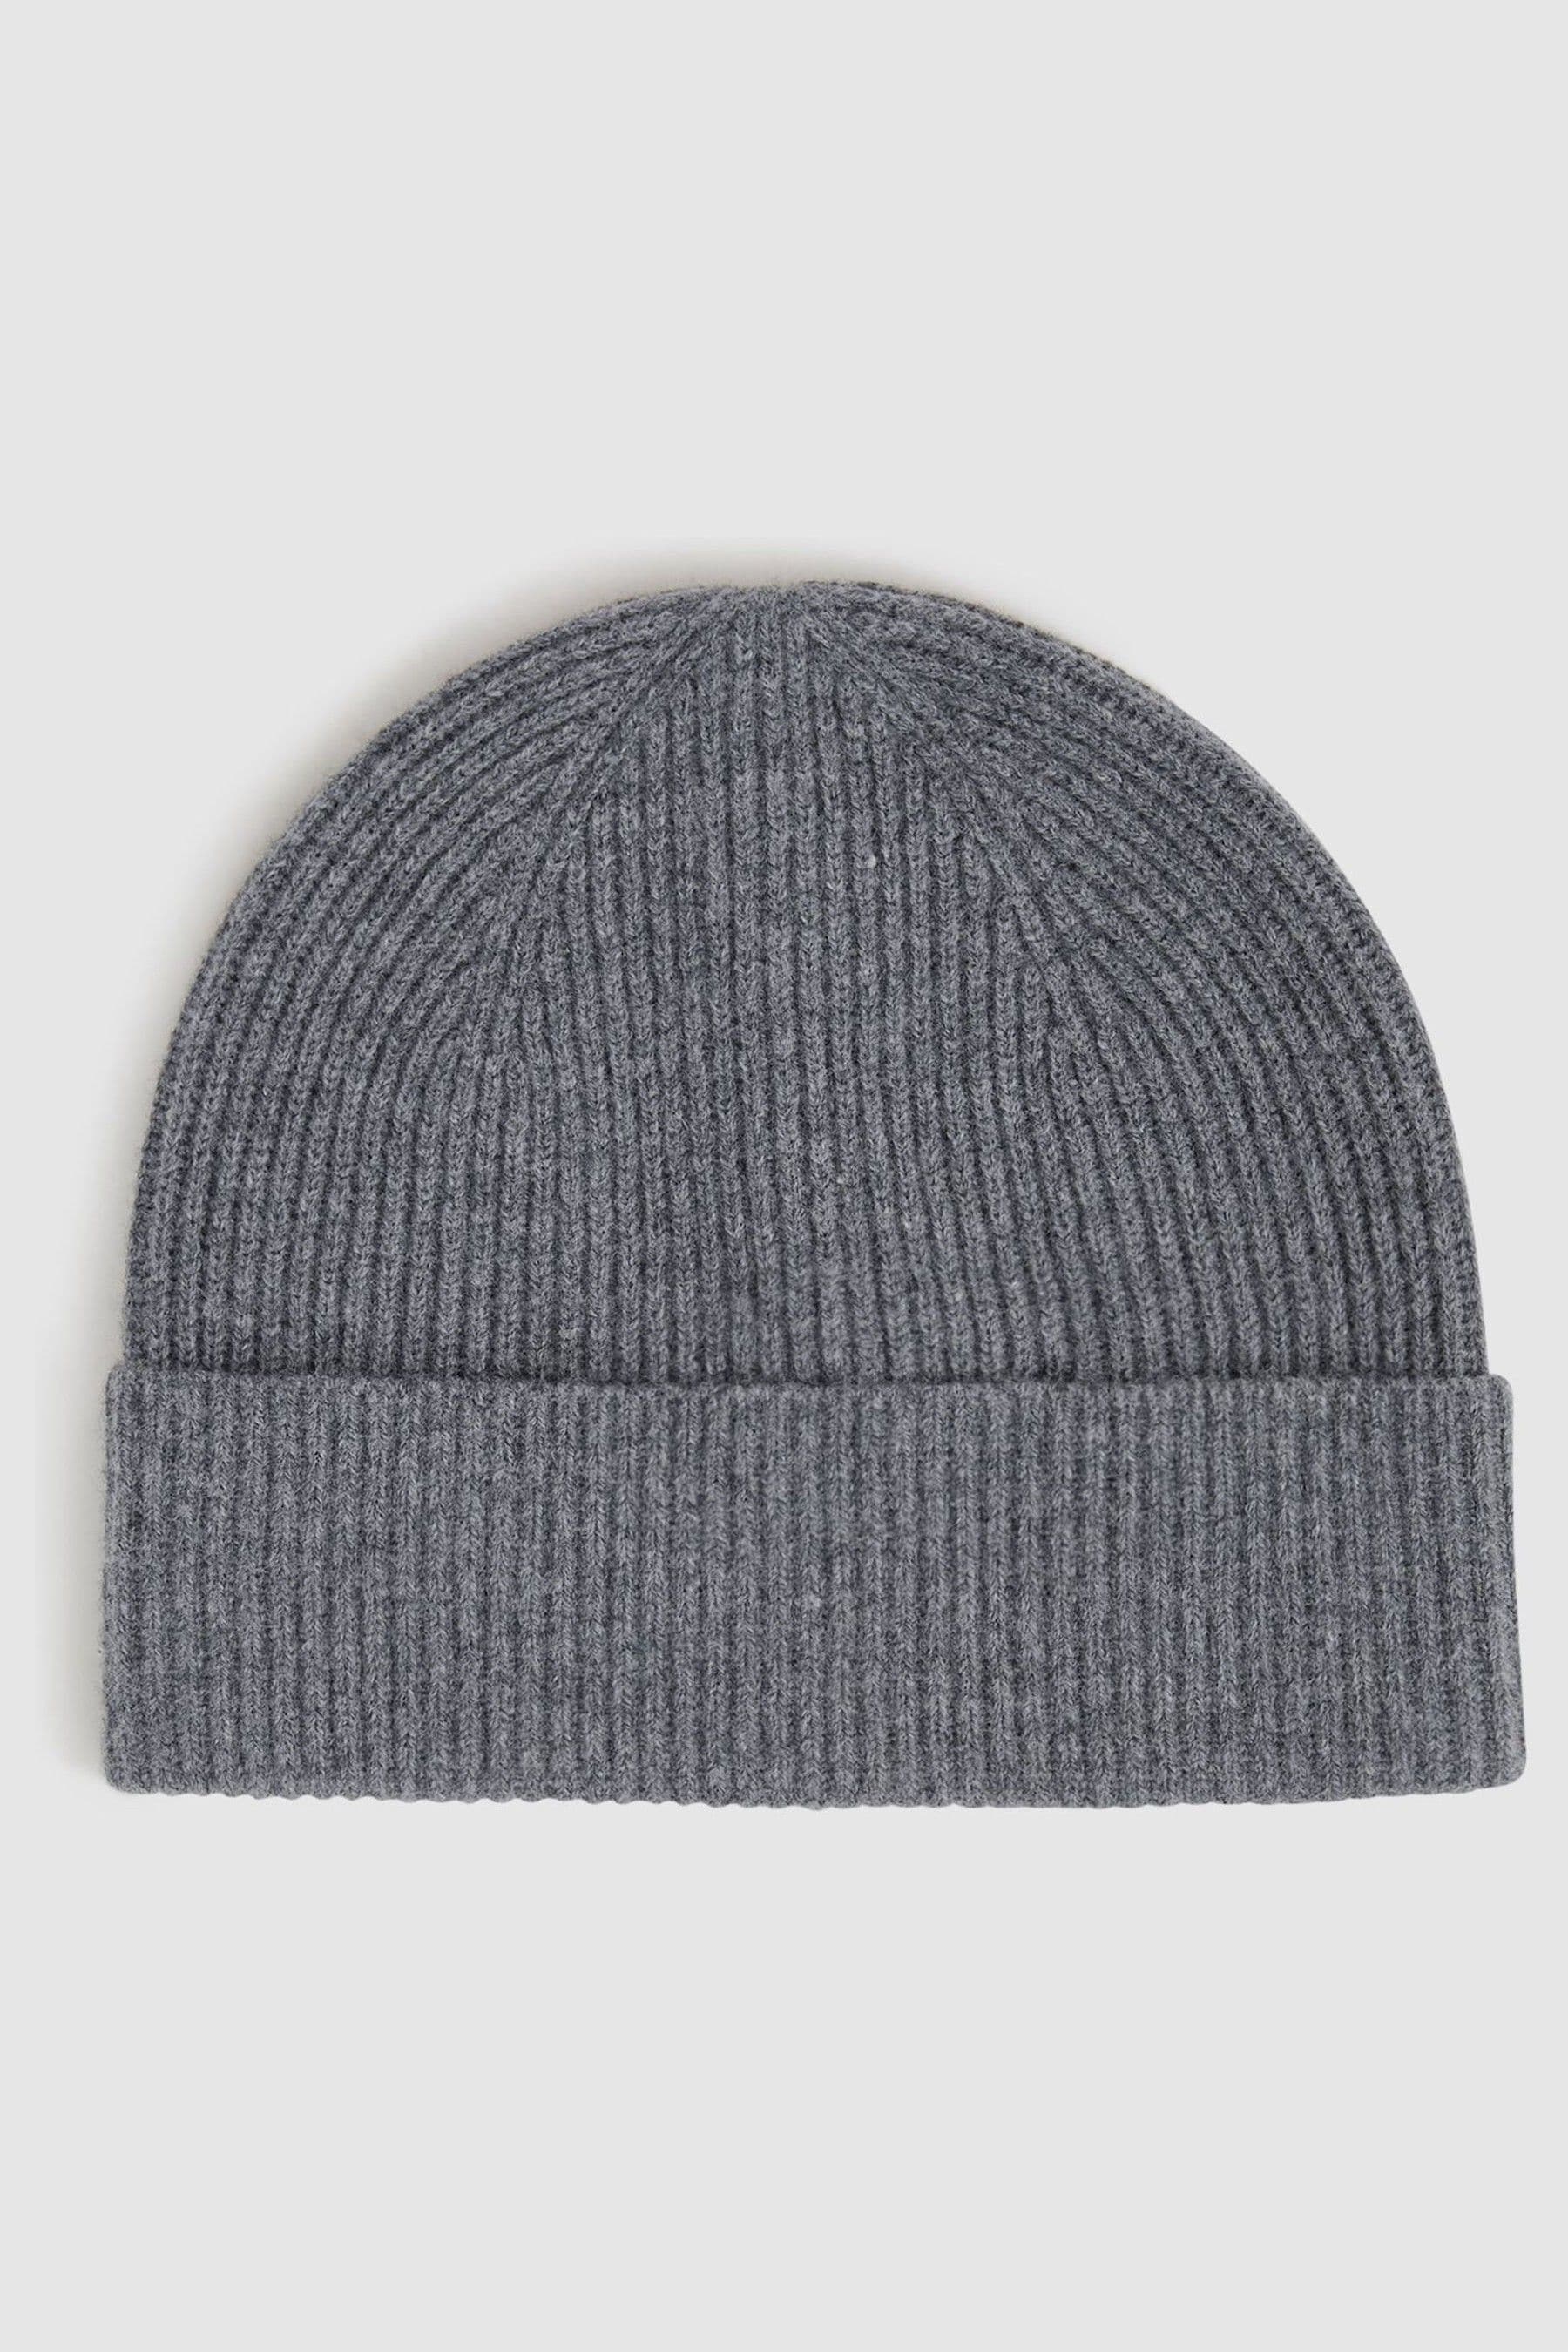 Reiss Chaise - Charcoal Merino Wool Ribbed Beanie Hat, One